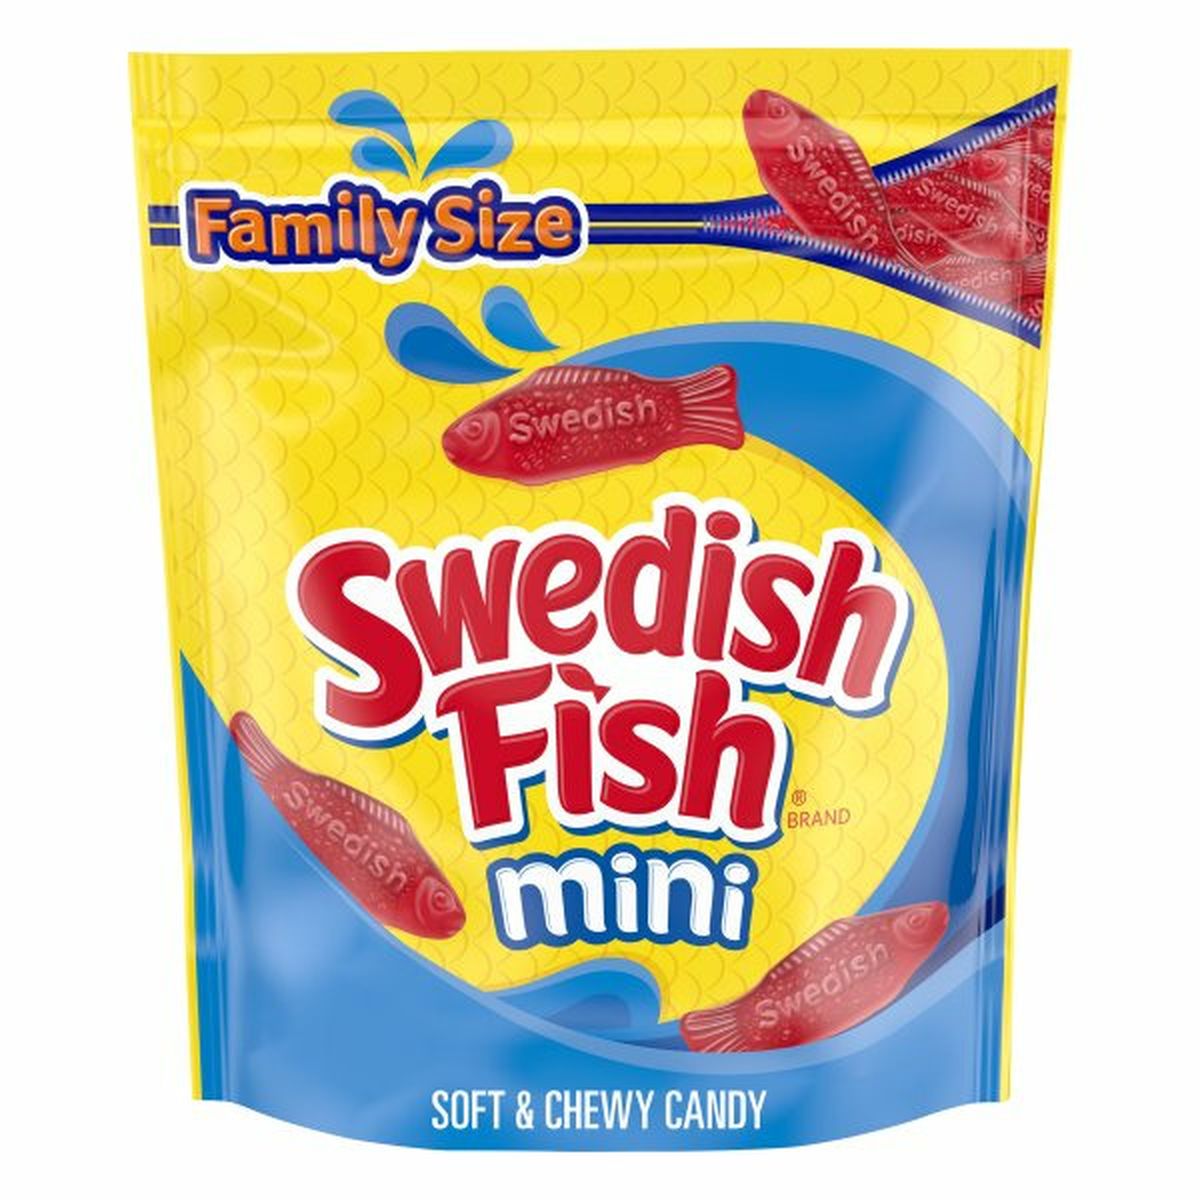 Calories in Swedish Fish Candy, Soft & Chewy, Mini, Family Size